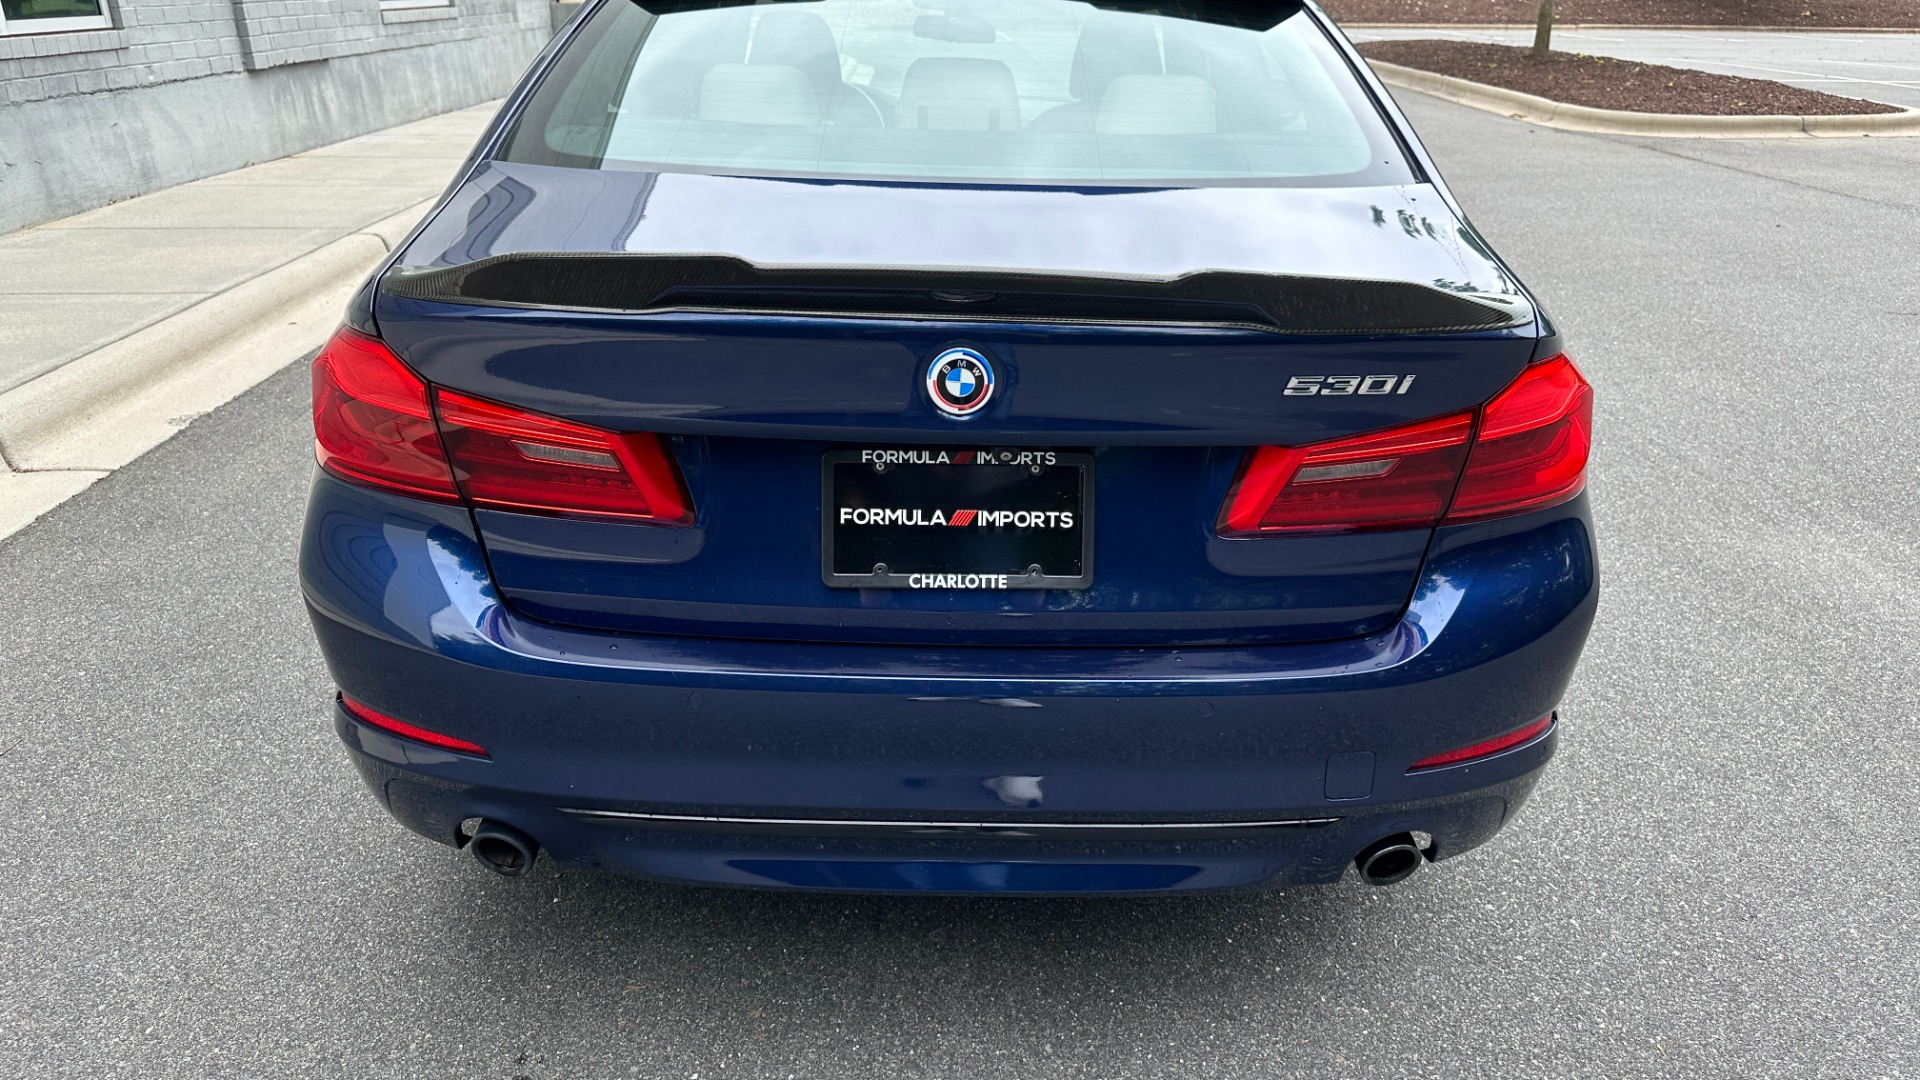 Used 2019 BMW 5 Series 530i / LIGHTING PACKAGE / CONVENIENCE PACKAGE / 19IN WHEELS for sale Sold at Formula Imports in Charlotte NC 28227 9